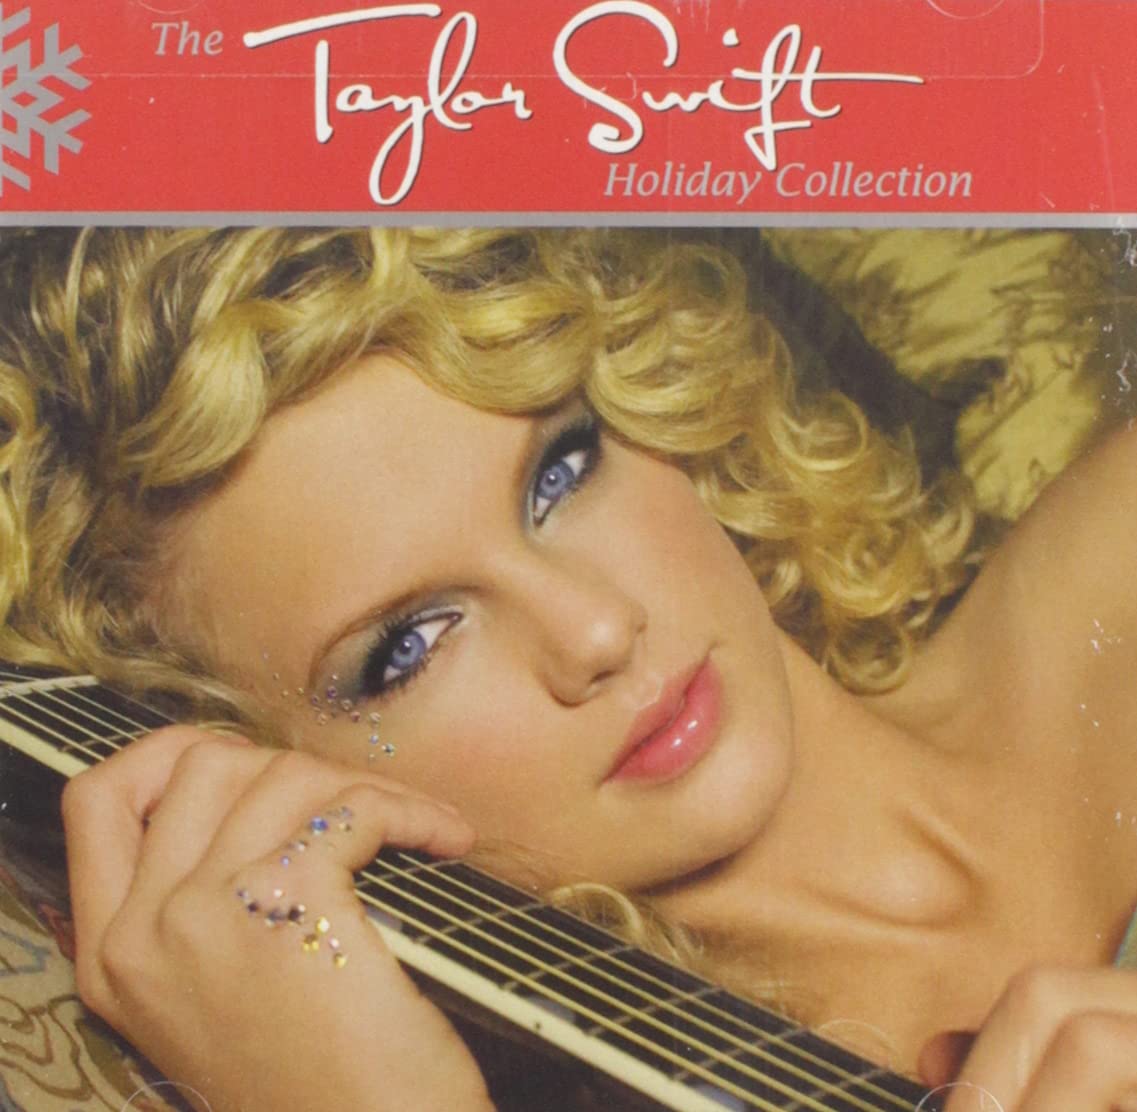 The Taylor Swift Holiday Collection|Taylor Swift